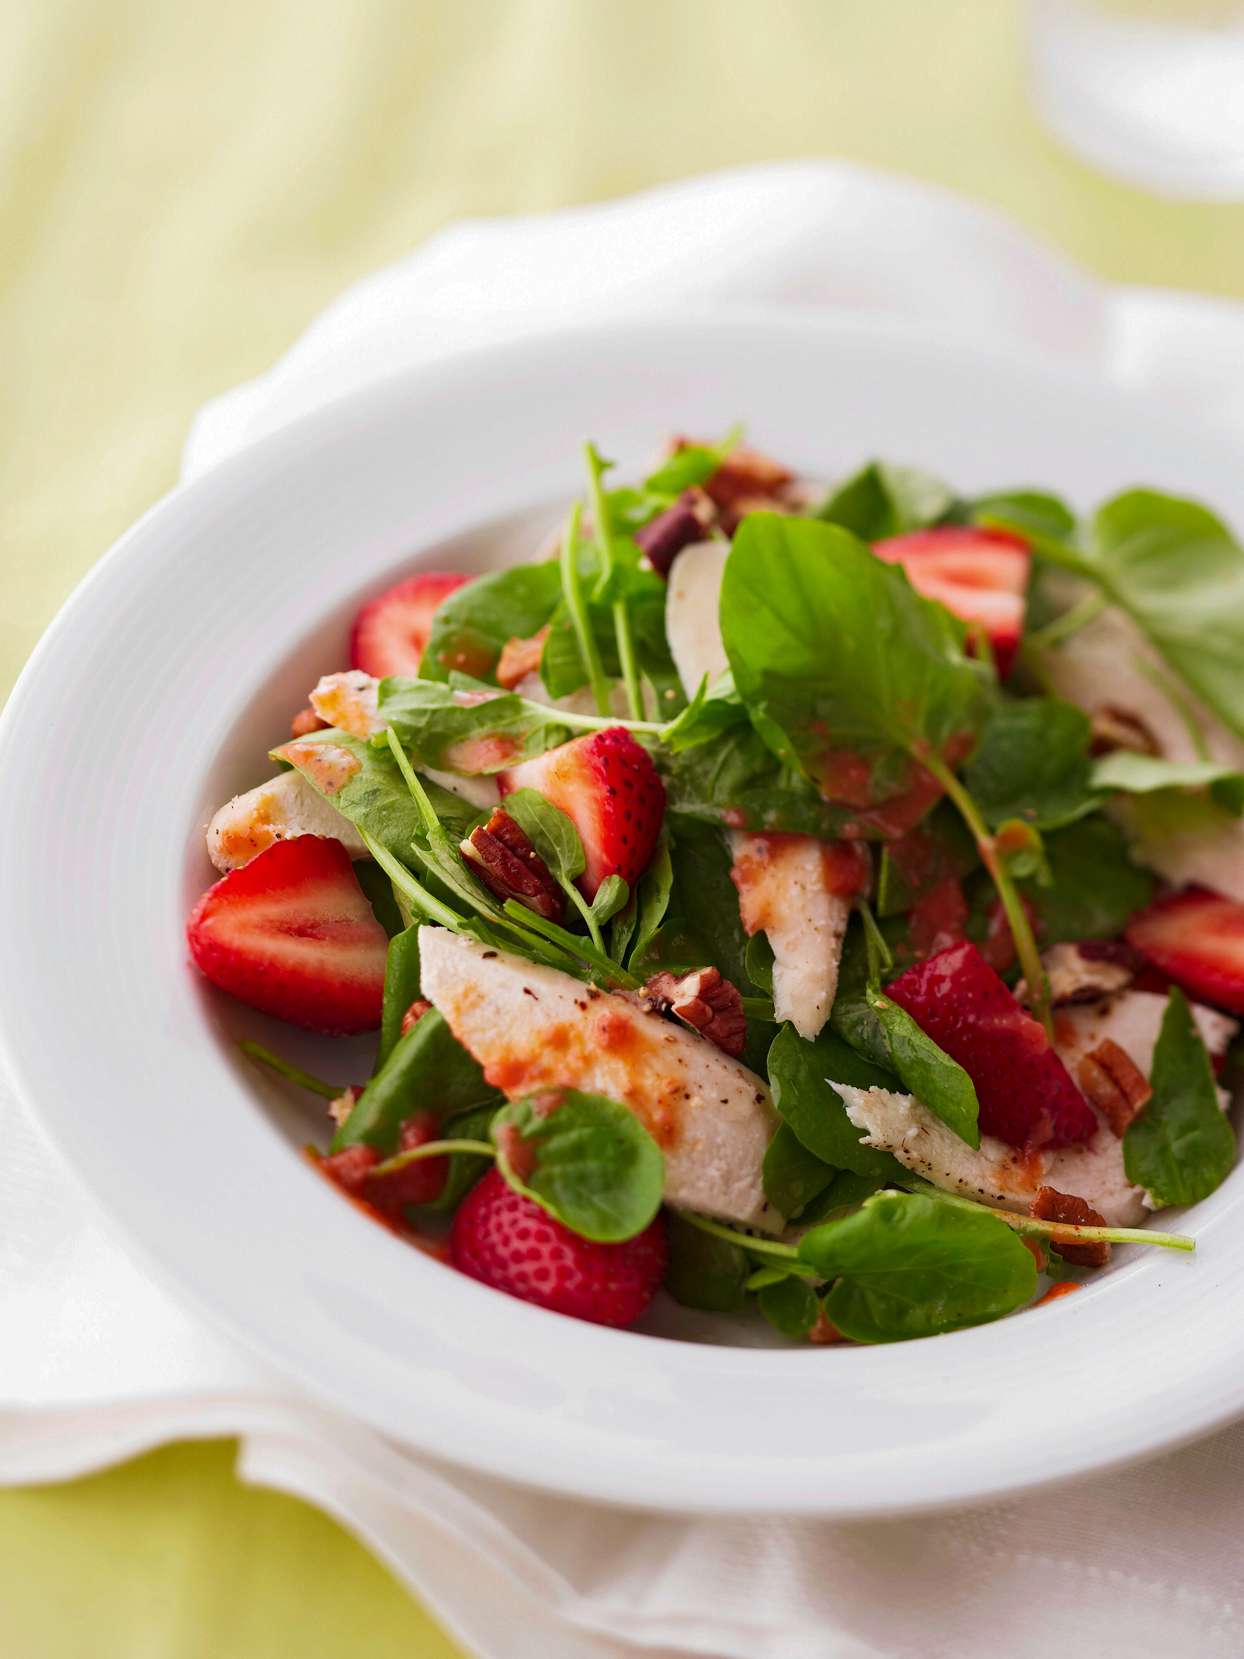 Strawberry-Spinach Salad with Citrus Dressing